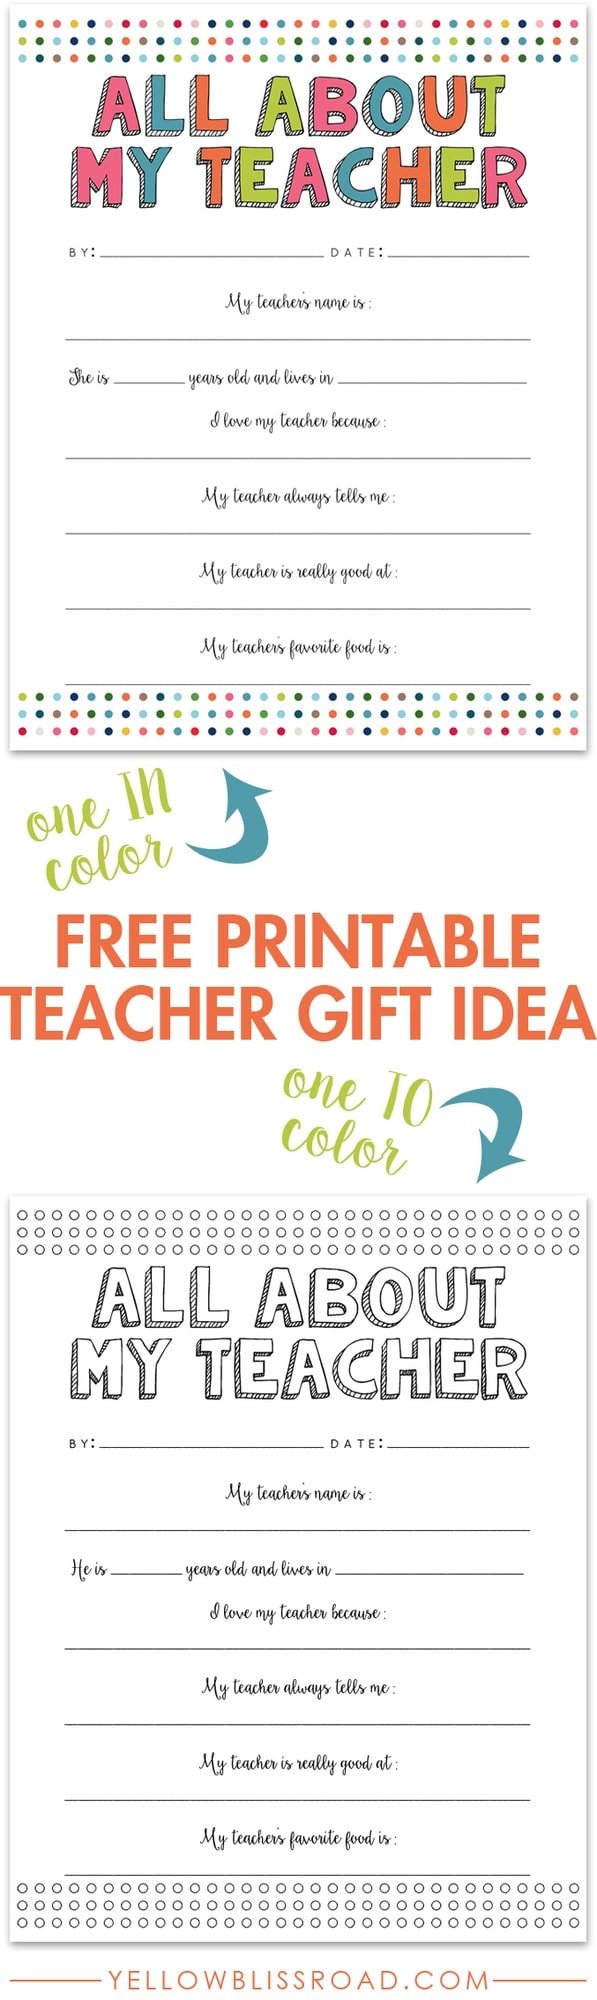 Free Printable Teacher Gift Idea - Great for a class gift too!